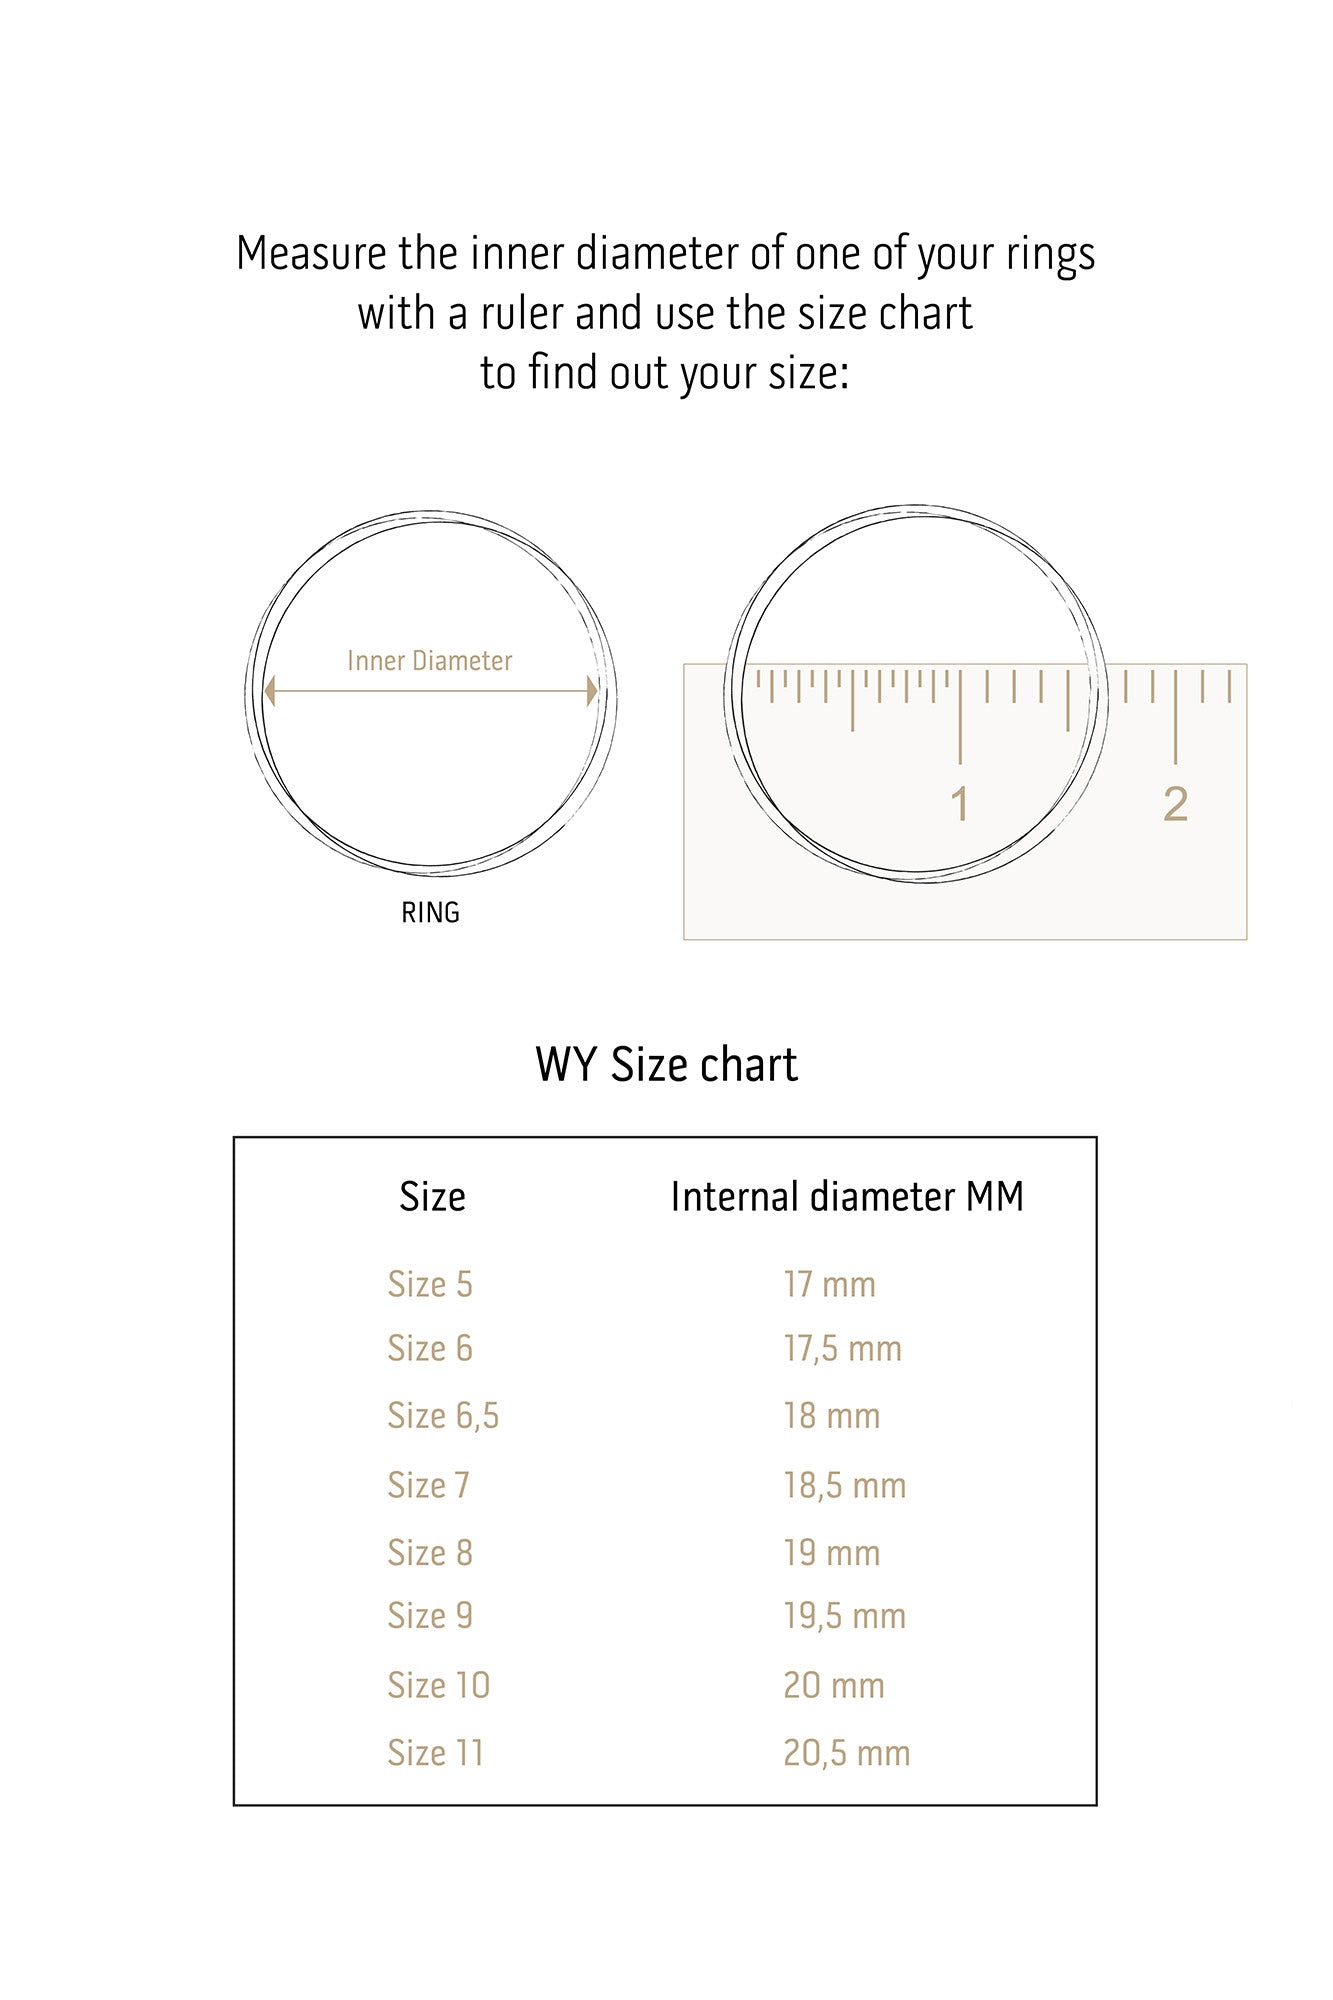 How To Find Your Finger Ring Size at Home? - FREE Finger Ring Size